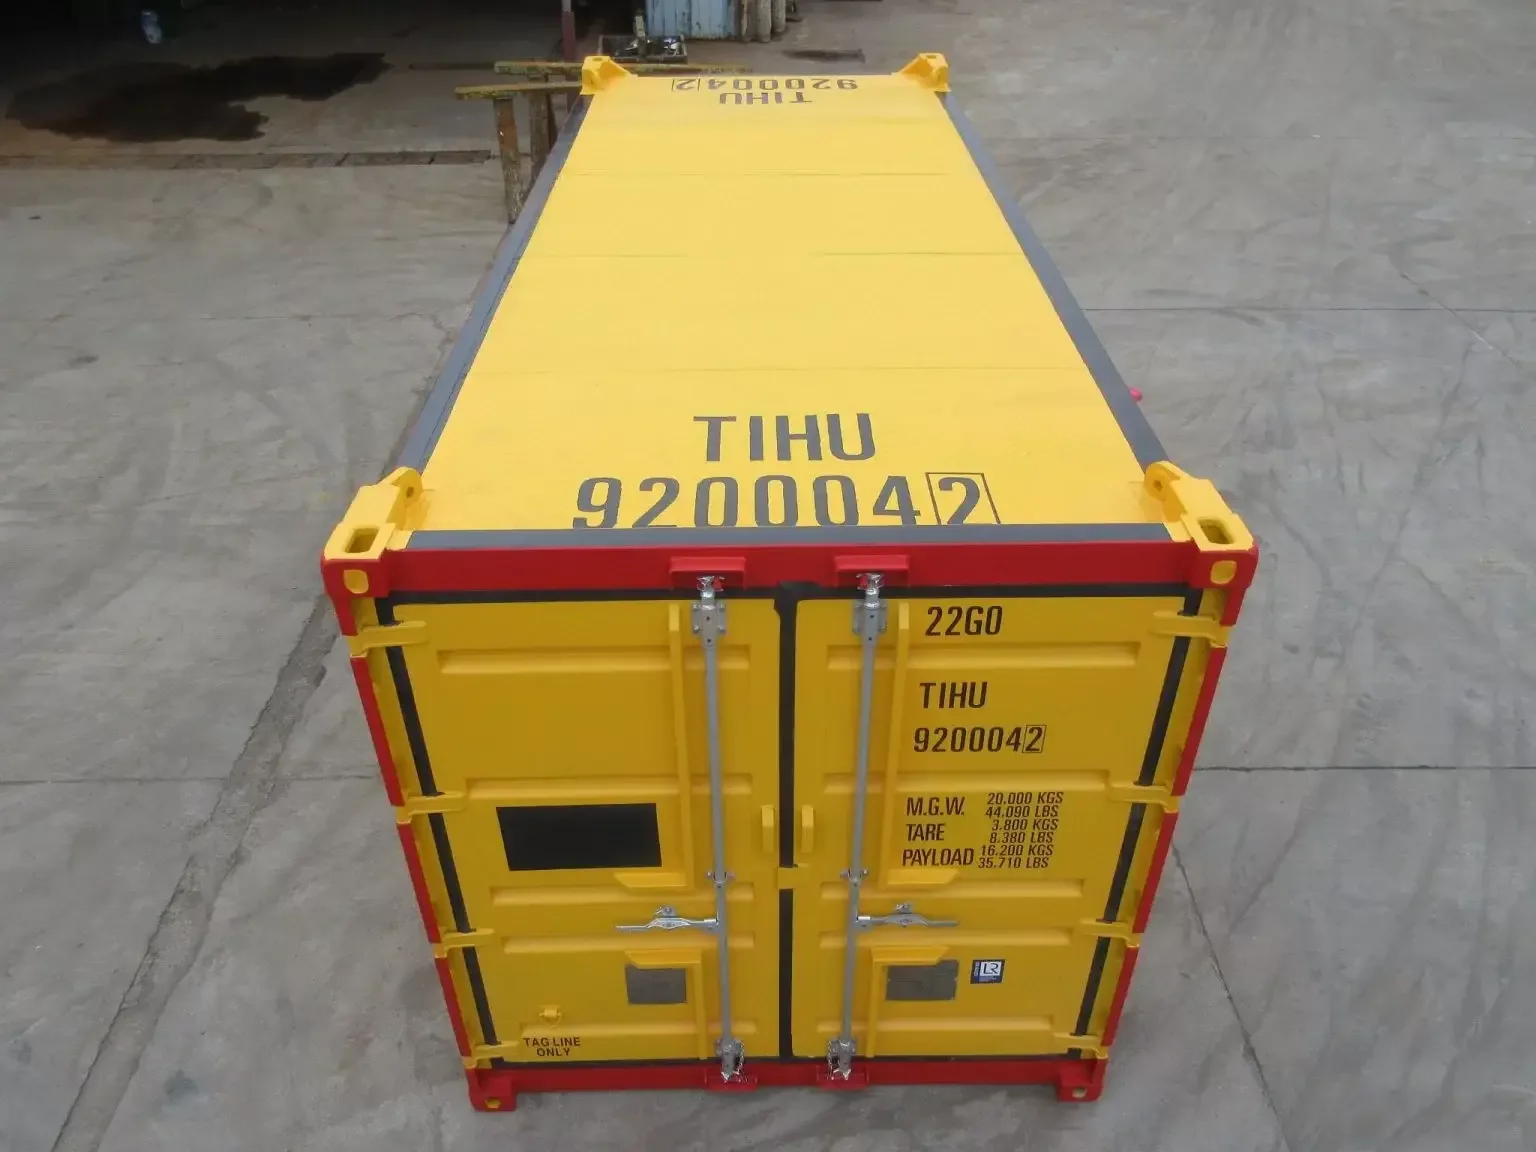 20ft Dry DNV Offshore, Shipping containers for sale, shipping containers, conex for sale, conex containers, conex box, shipping container,